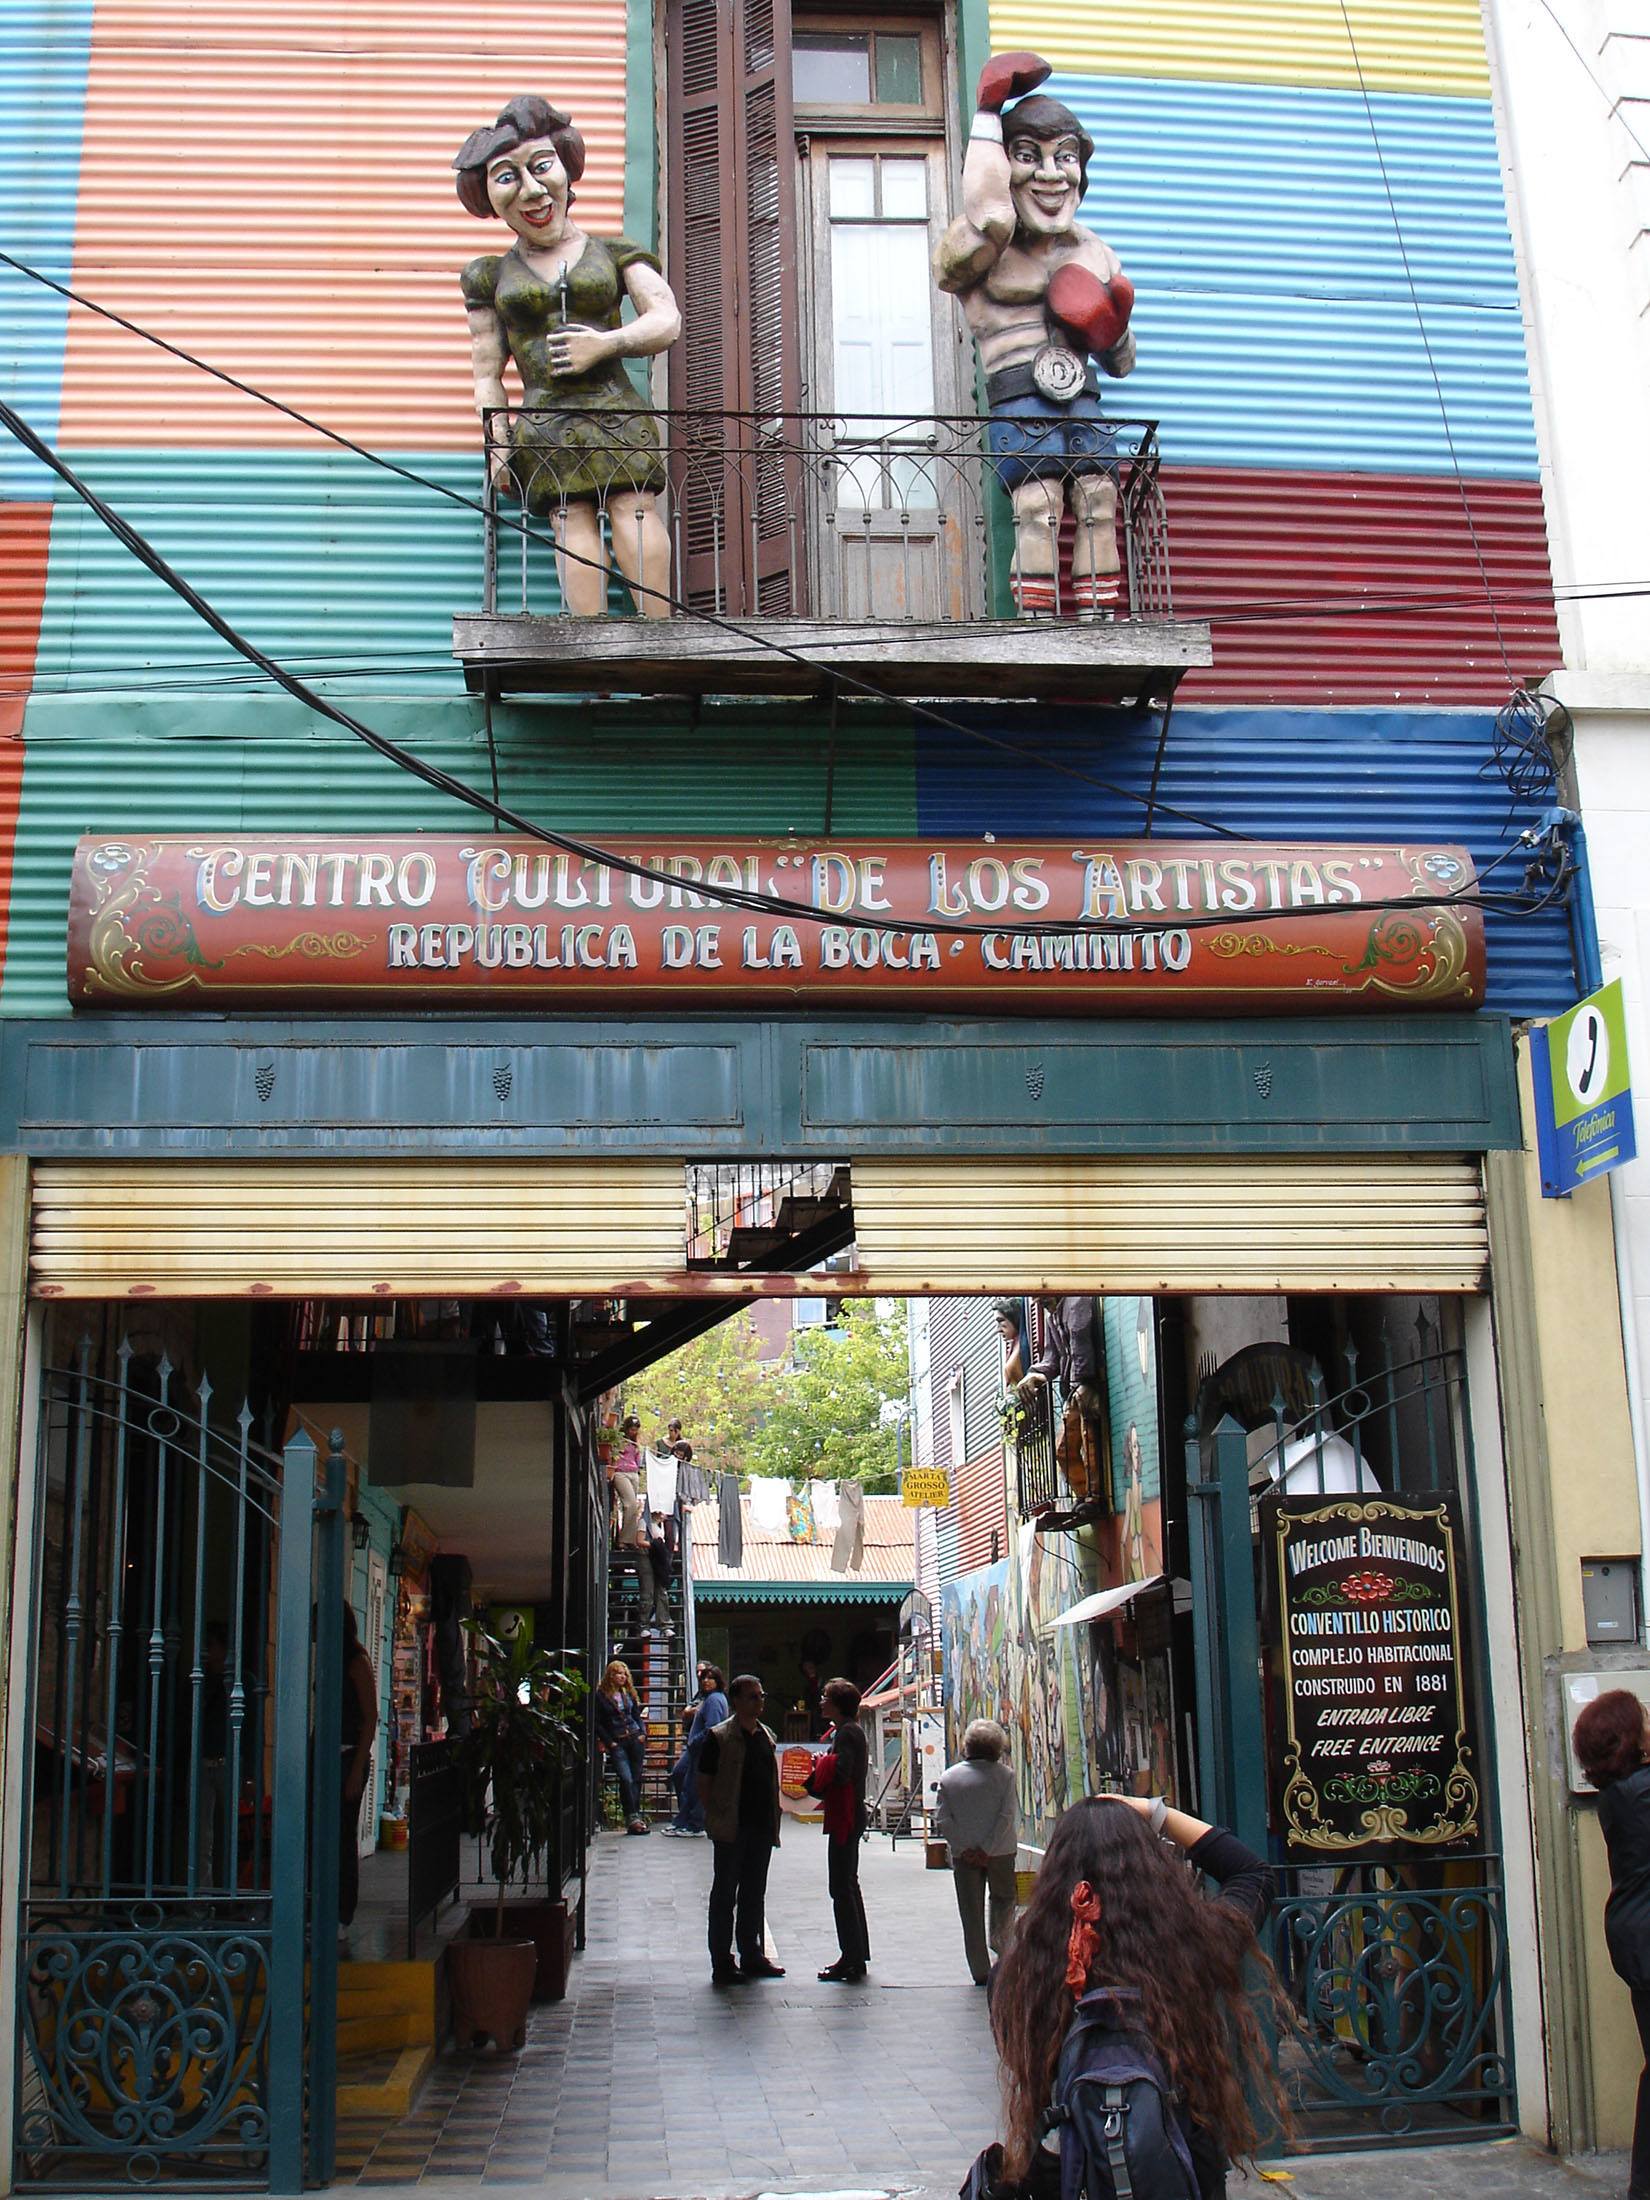 Statues on a balcony in La Boca Buenos Aires Argentina